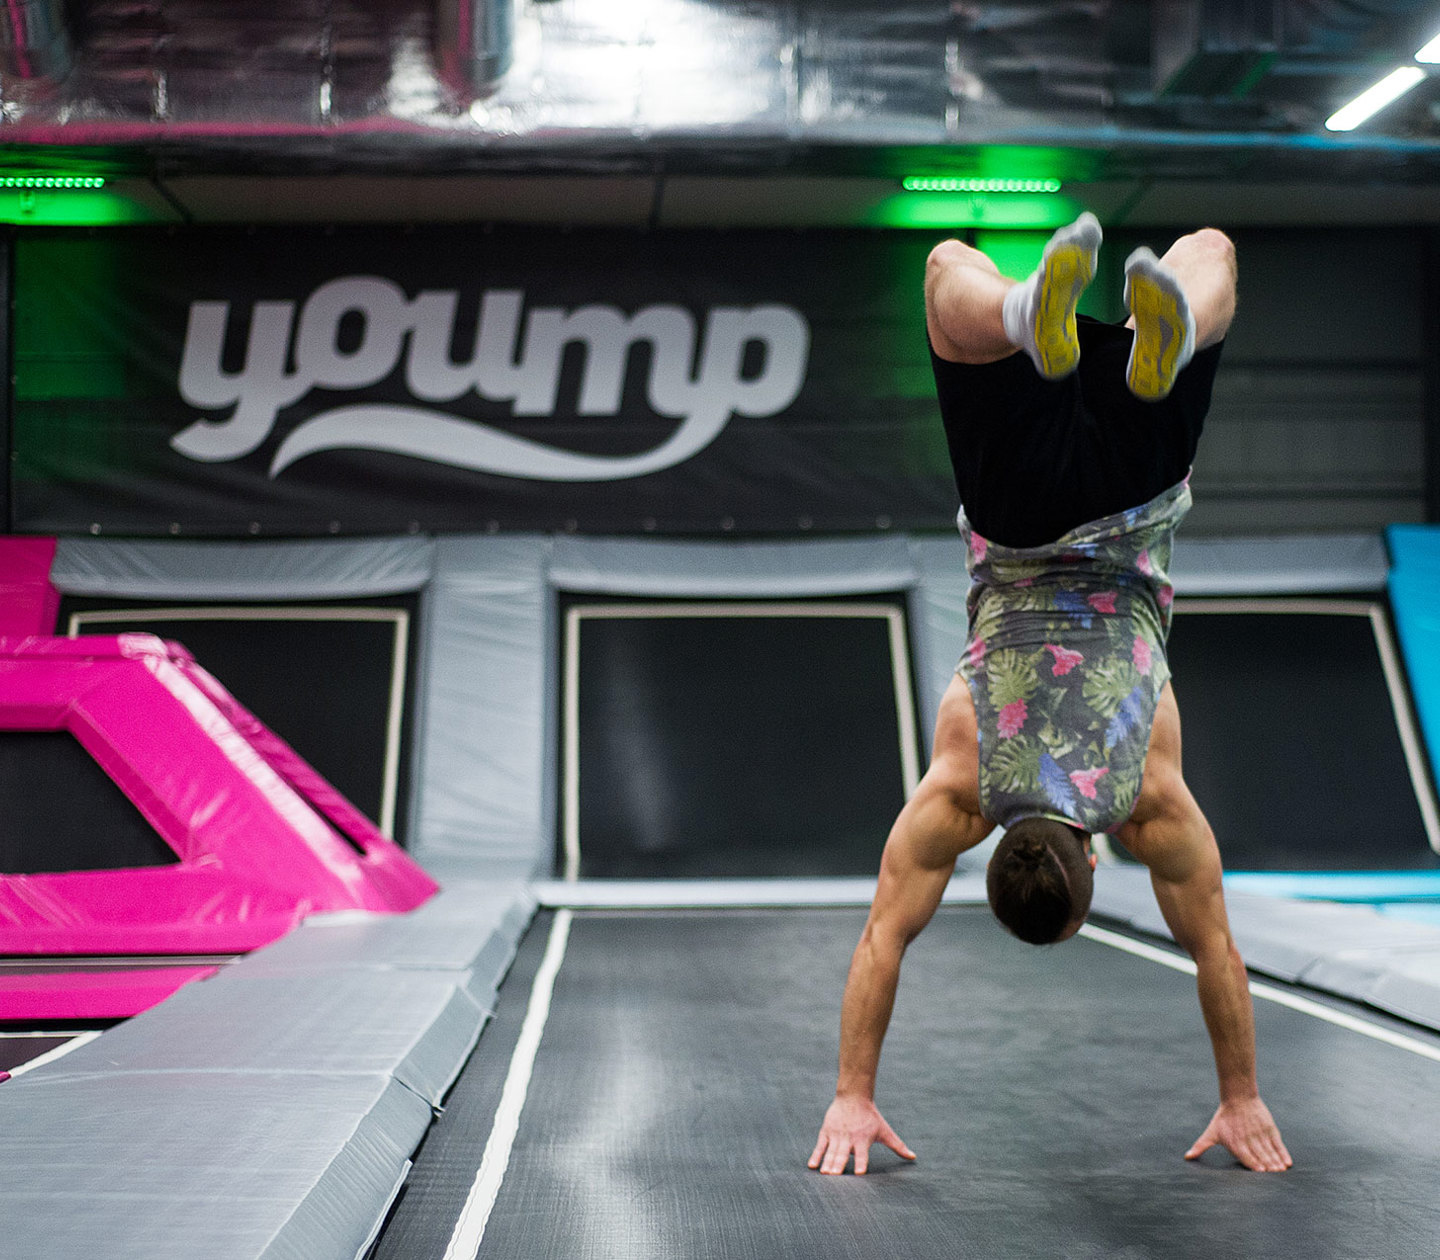 A person standing on hands on a trampoline